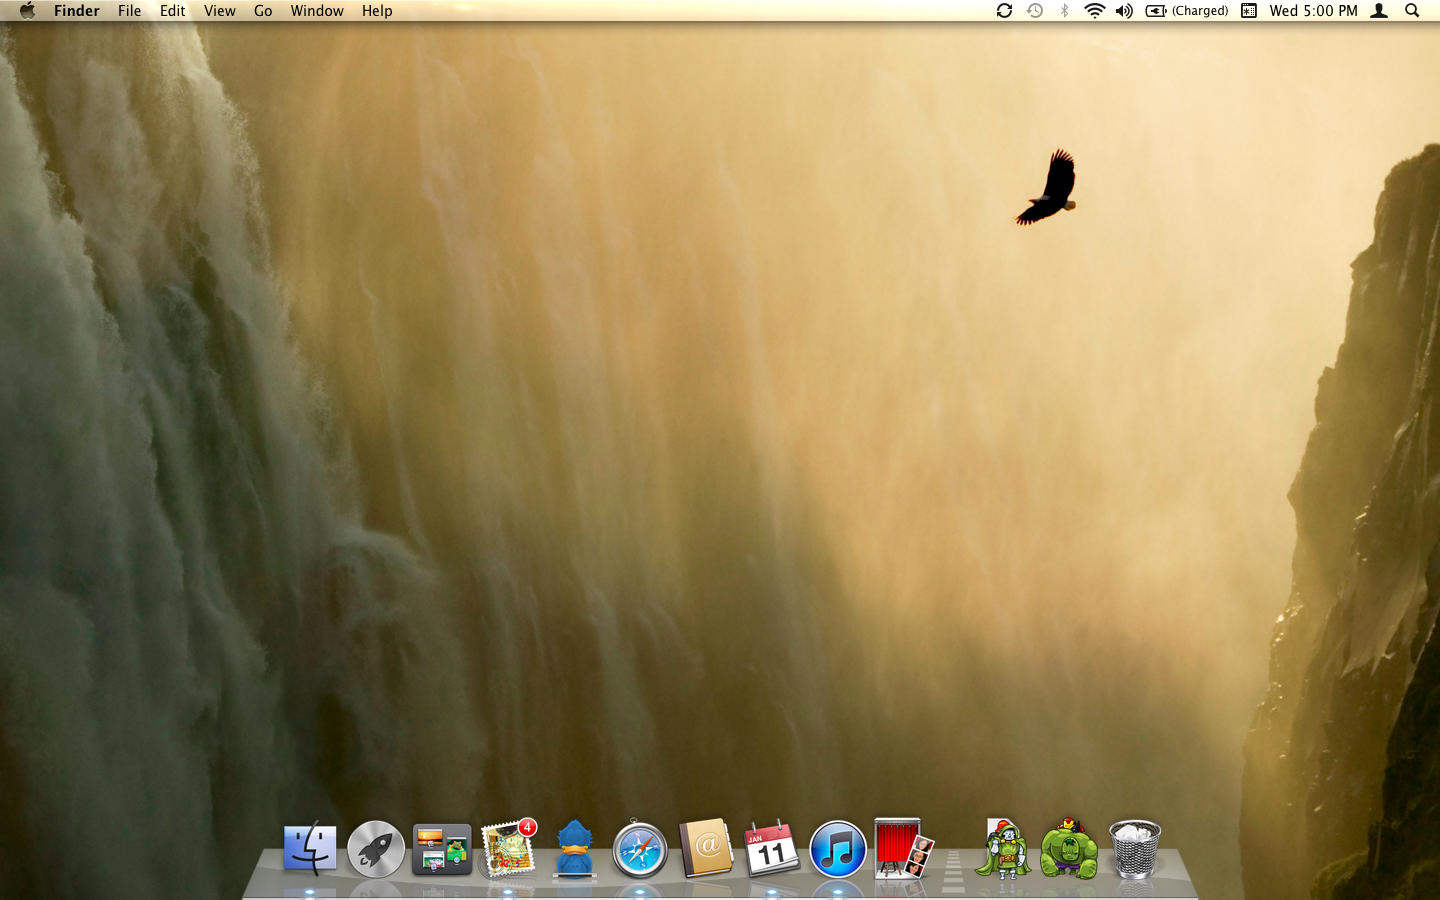 ... your Mac change its desktop picture automatically on a regular basis